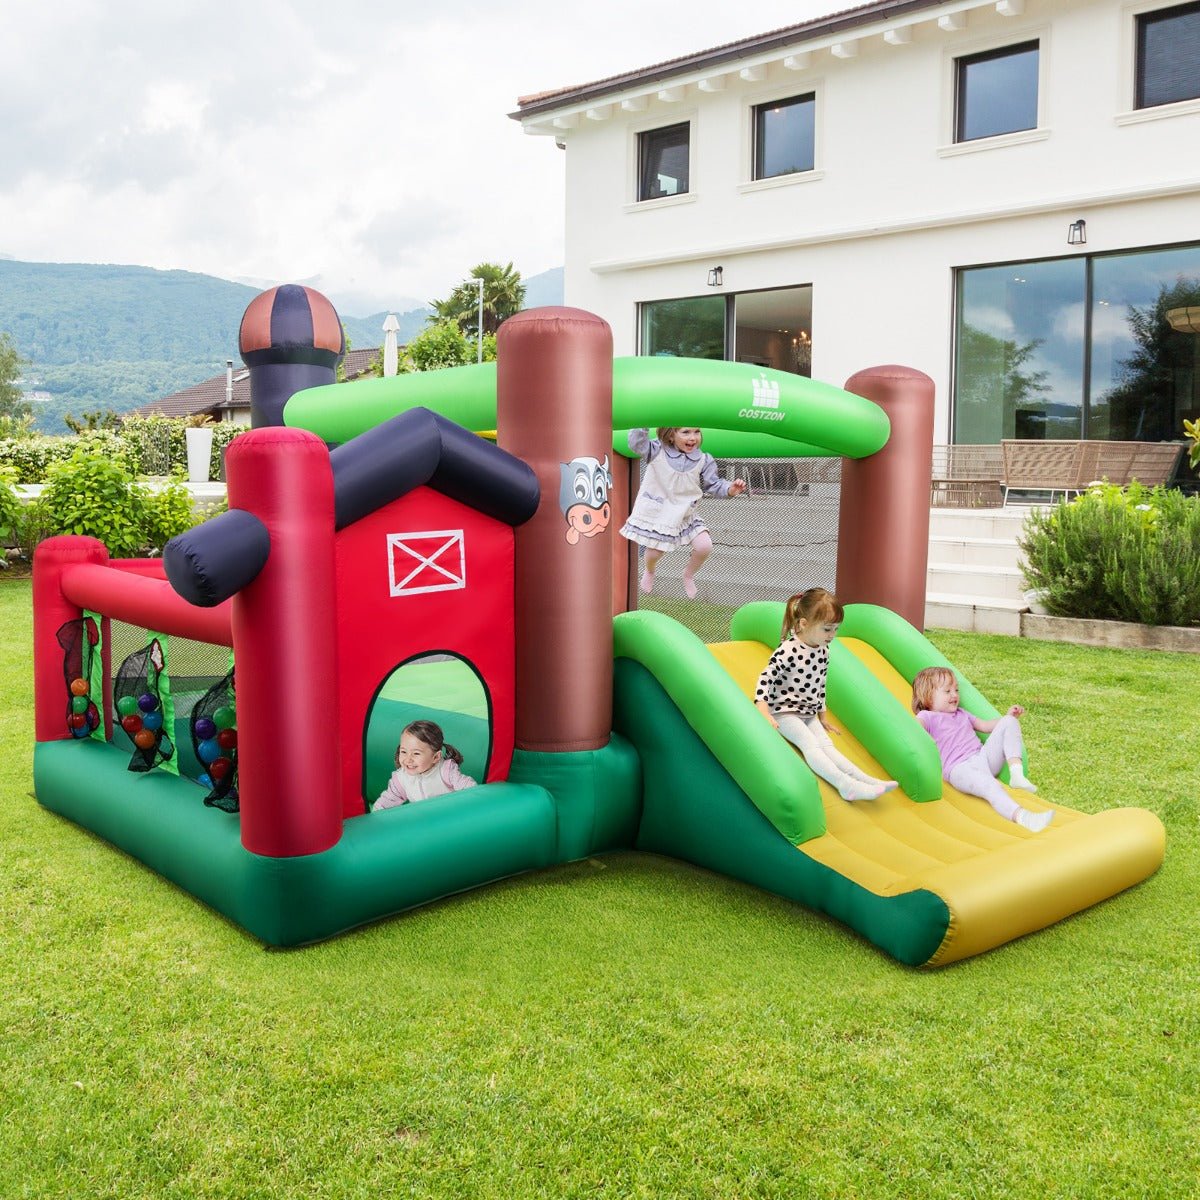 Double Slide Bounce Castle - Outdoor Playtime Excitement for Children